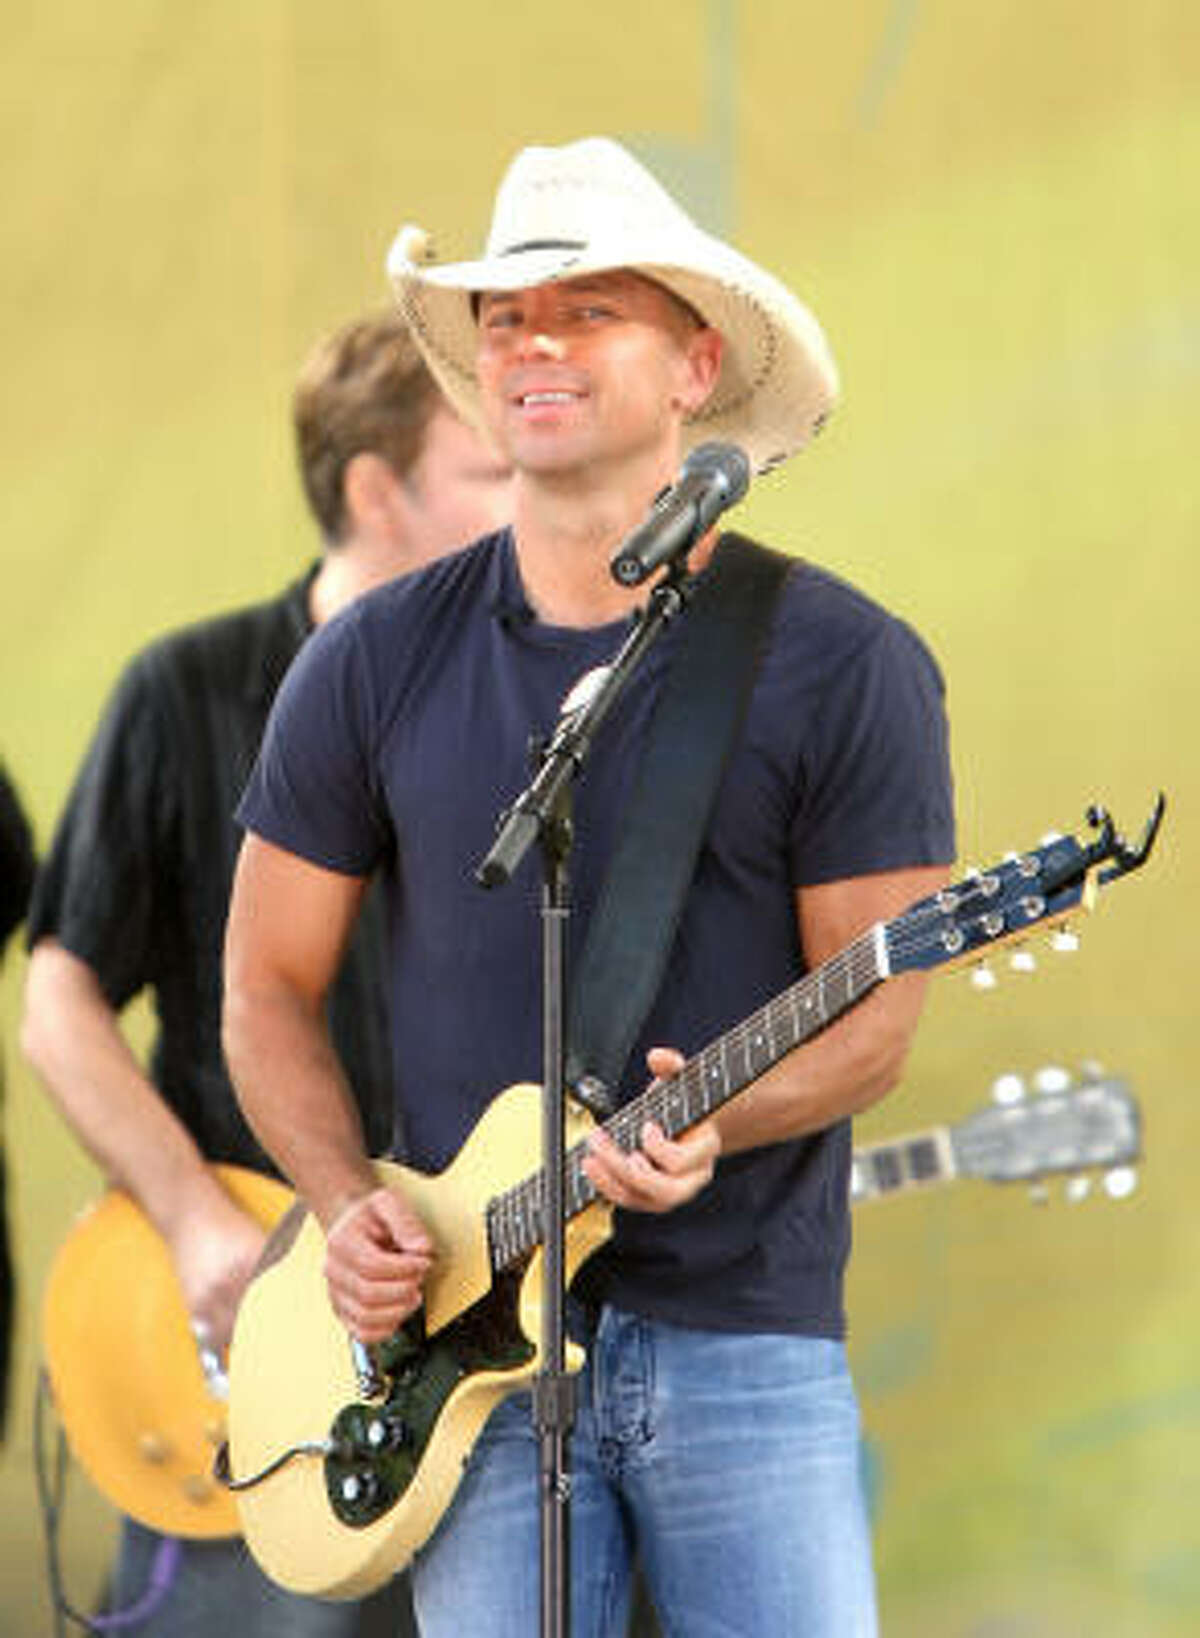 Kenny Chesney was nominated for entertainer of the year and male vocalist of the year.